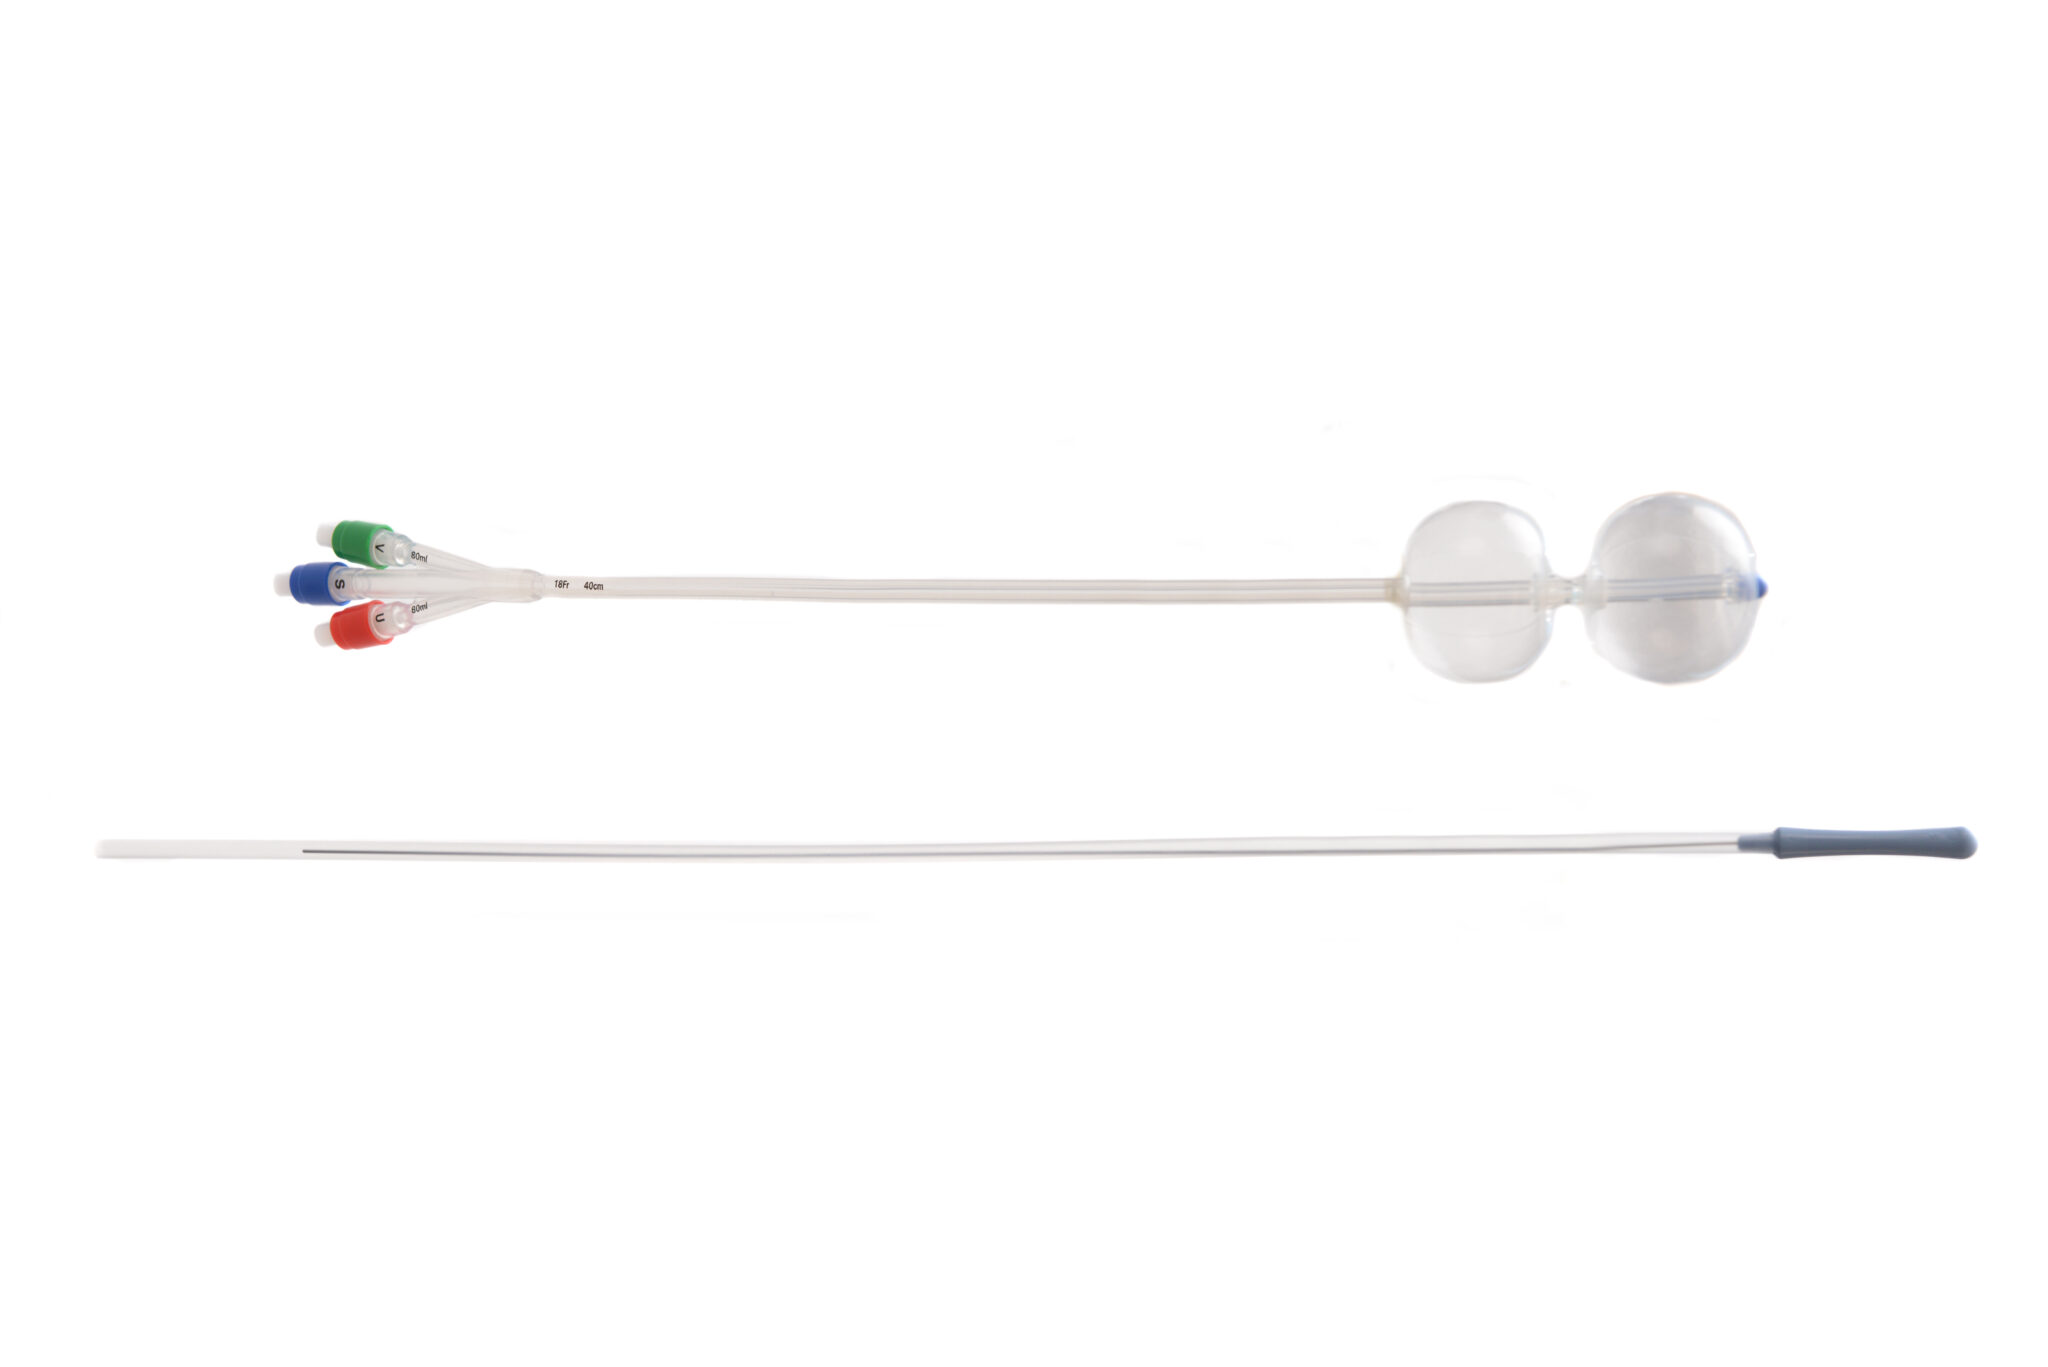 Cook® Cervical Ripening Balloon with Stylet